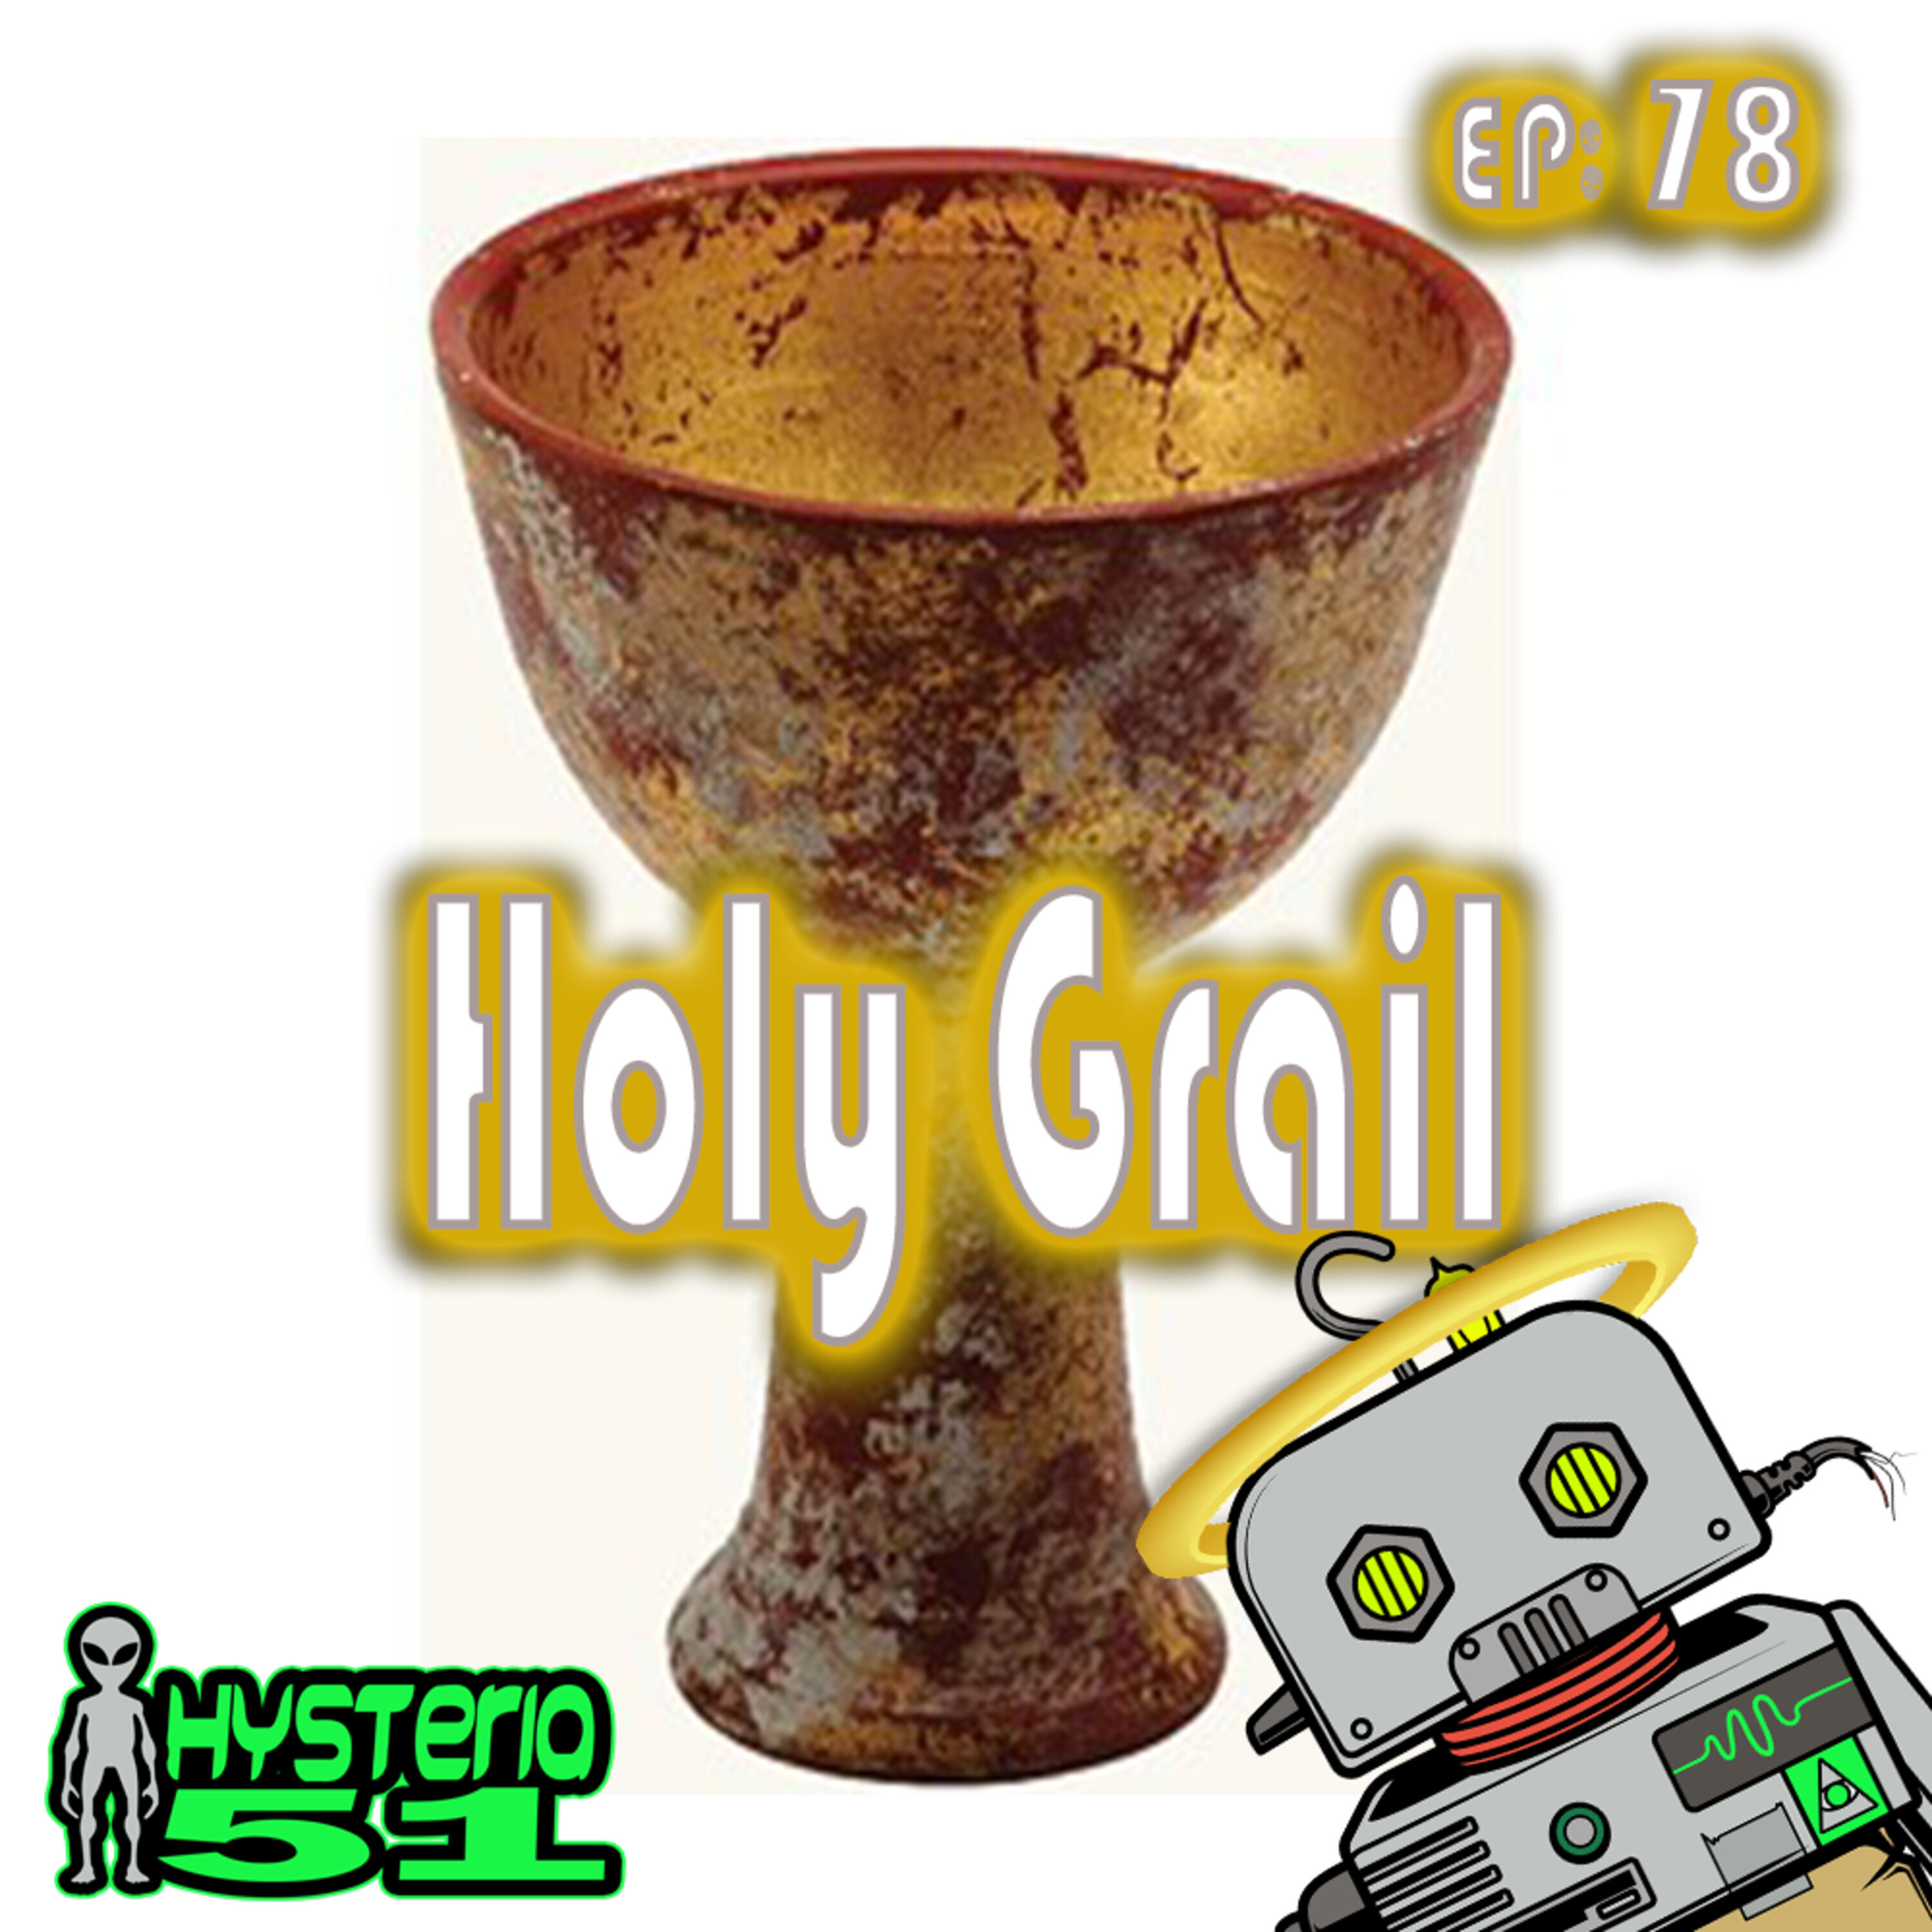 The Holy Grail: Holy Cup, Holy Bloodline, or Holy Hoax? | 78